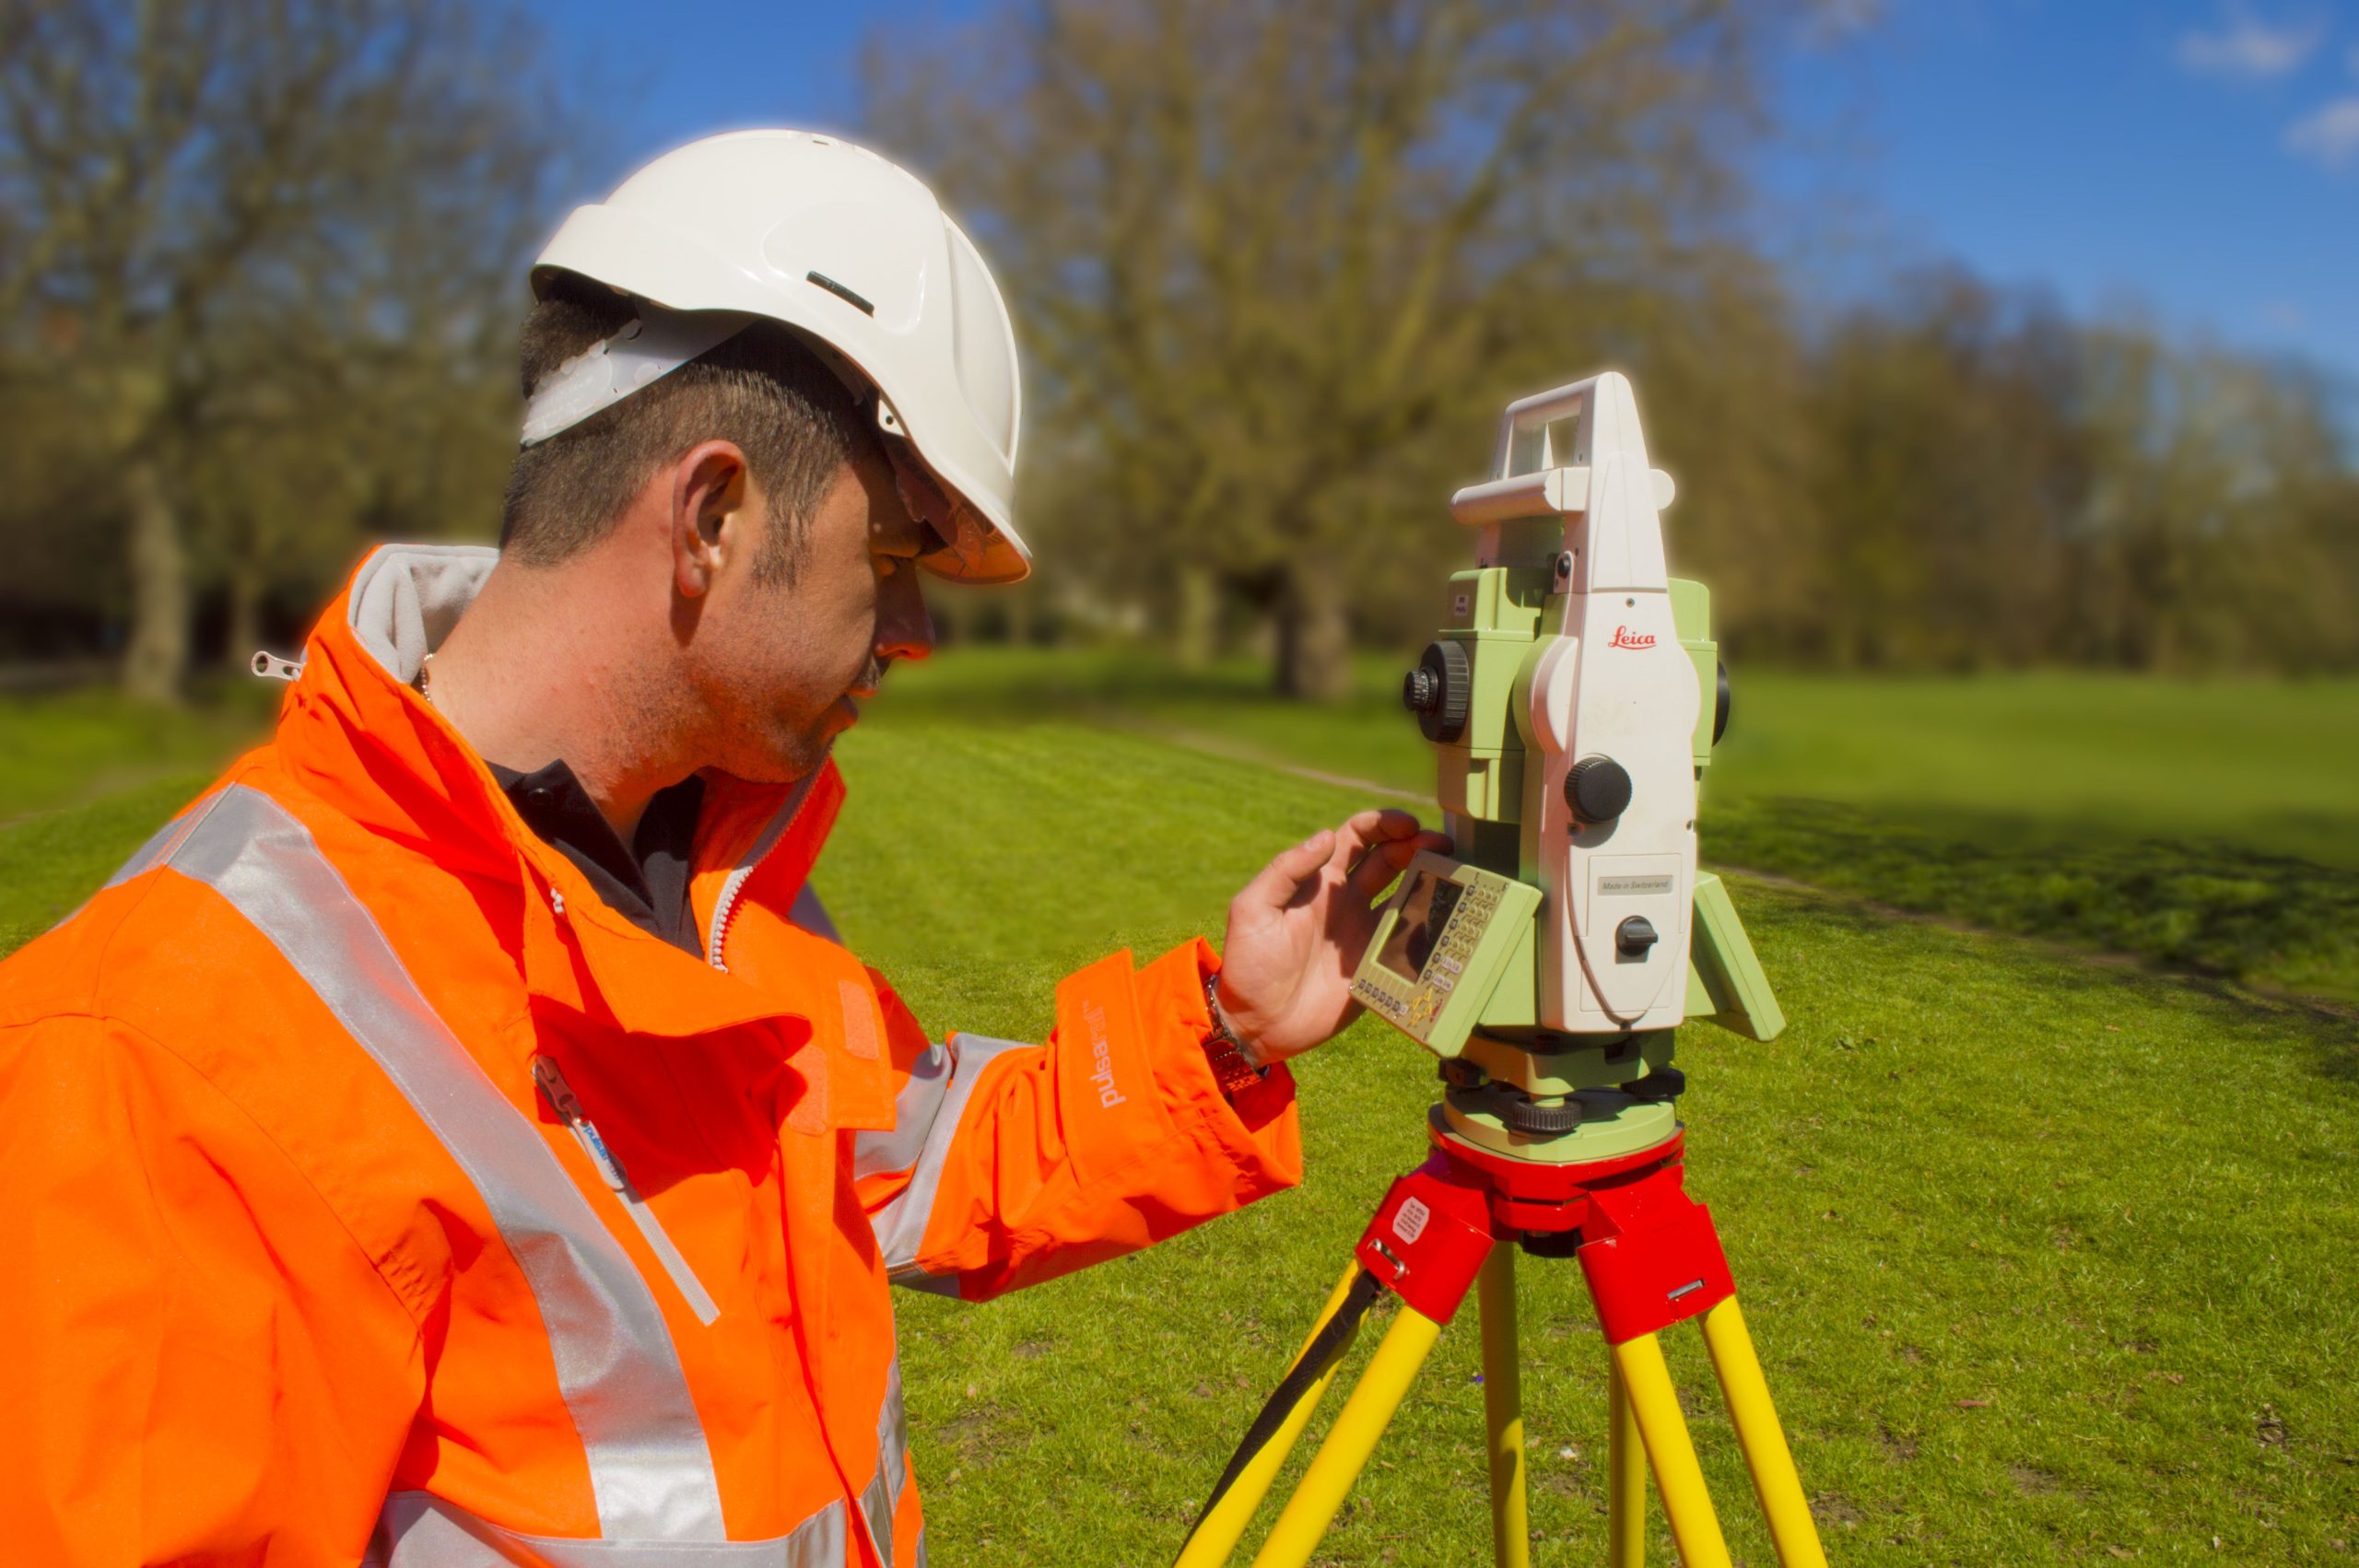 Geospatial – Producing topographic surveys and 3D models using a variety of GNSS, Total Station and 3D Laser Scanning technology.